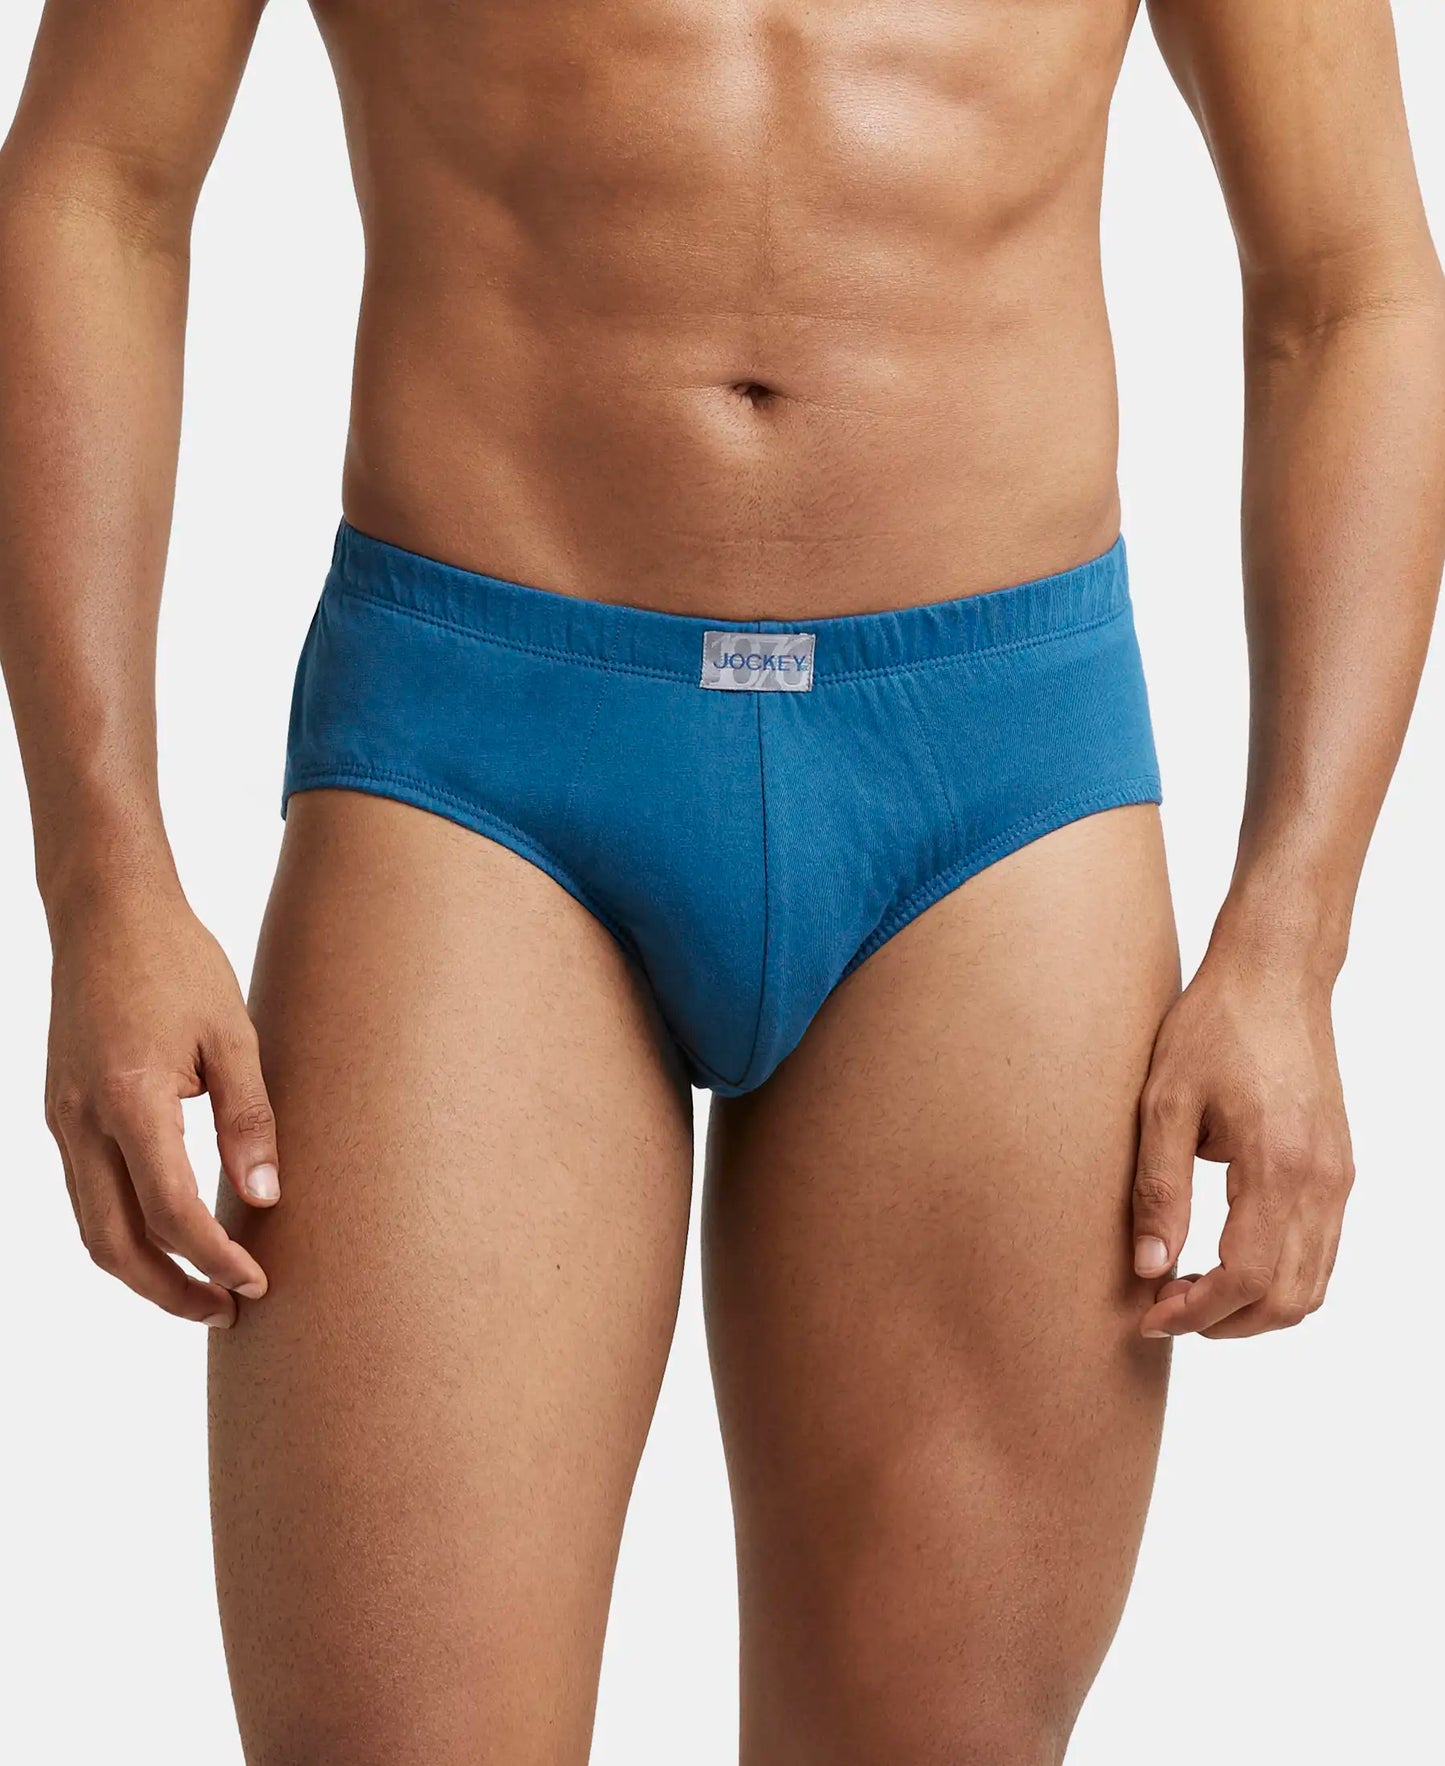 Super Combed Cotton Solid Brief with Ultrasoft Concealed Waistband - Seaport Teal-2